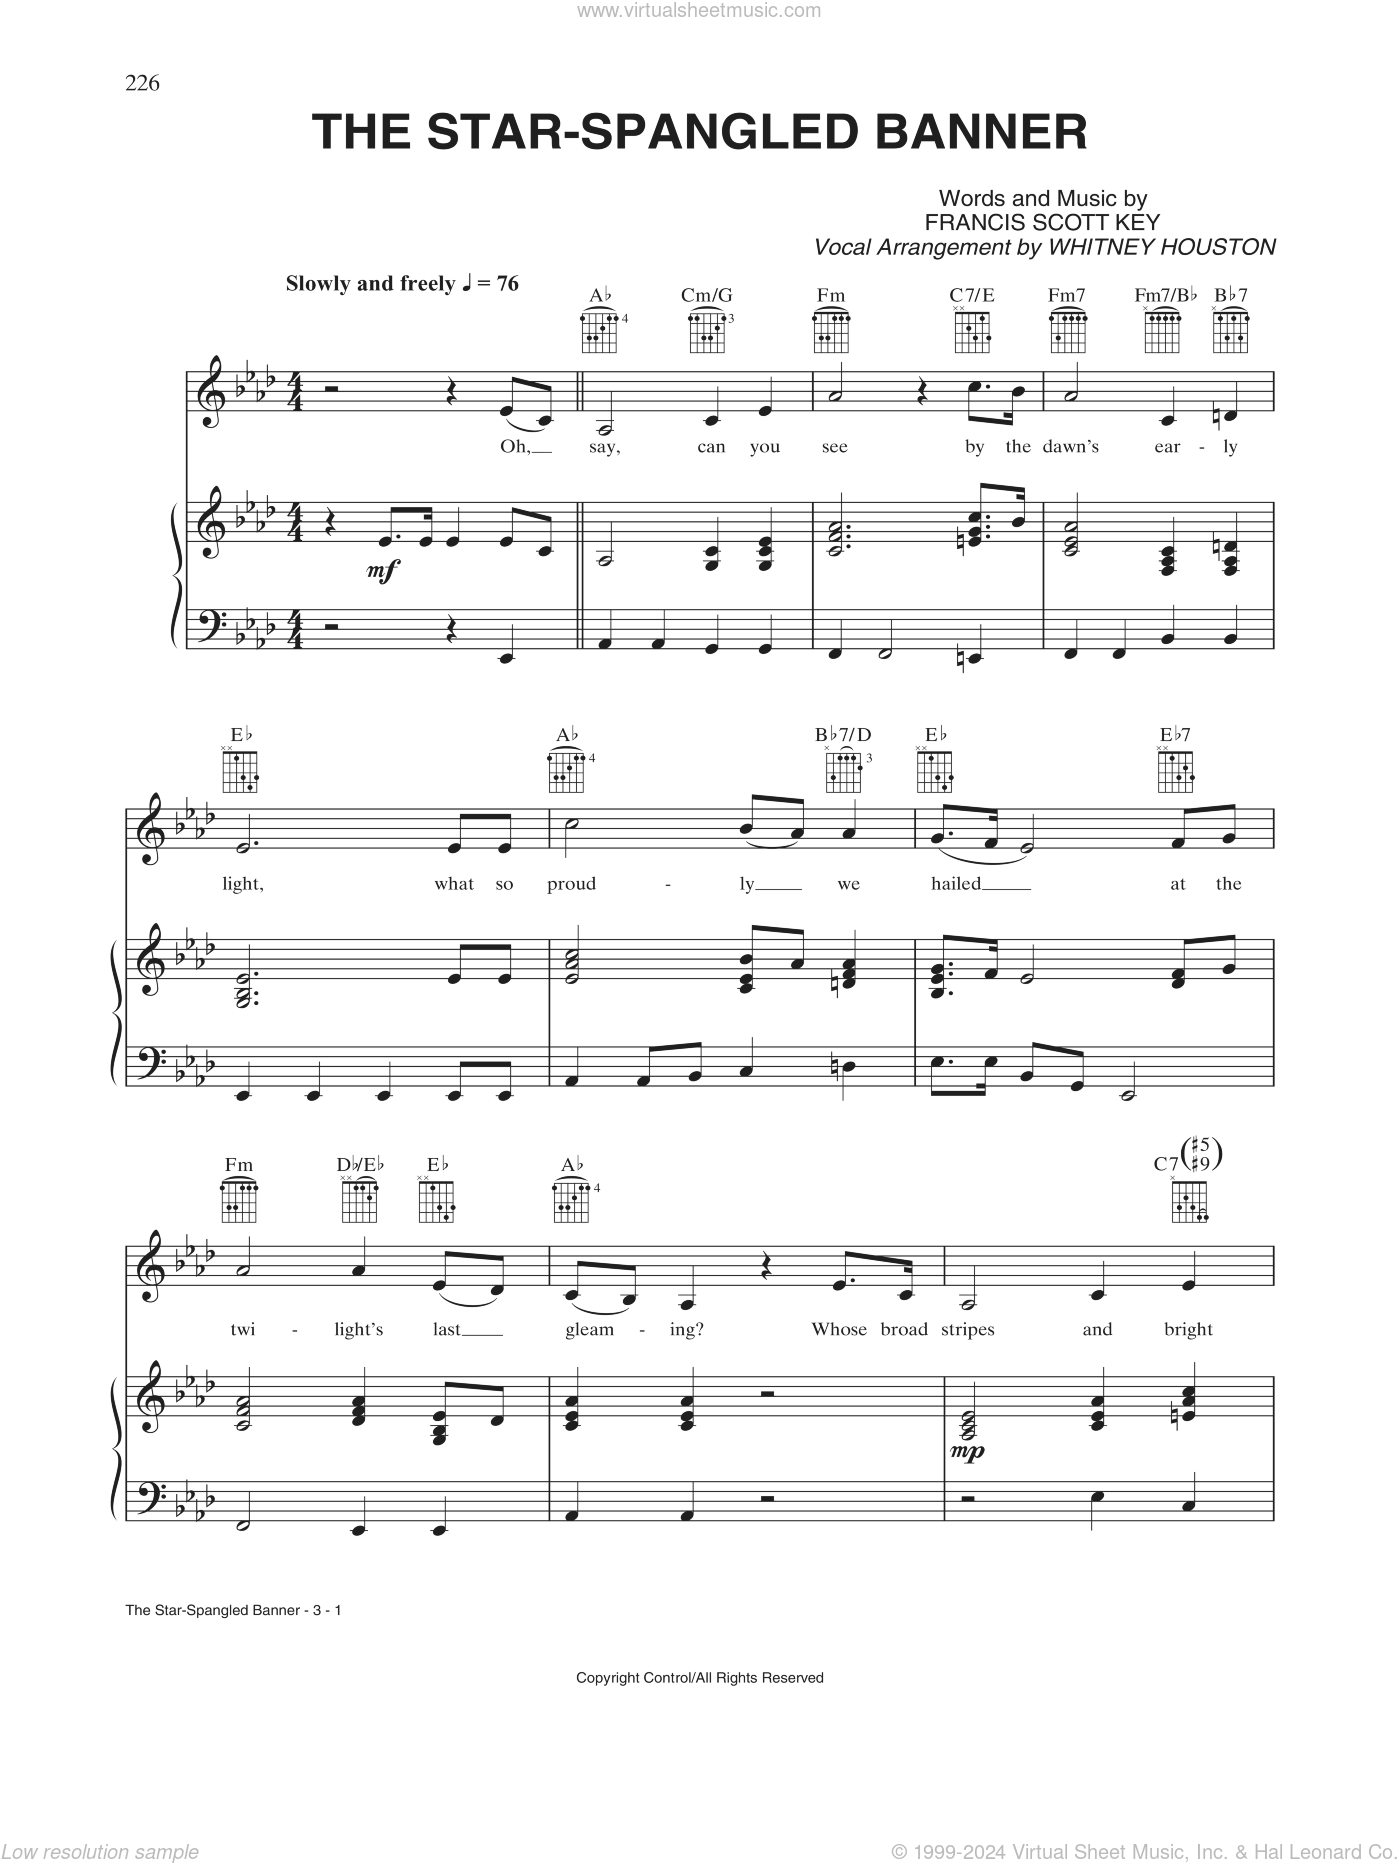 The Star-Spangled Banner for guitar - chords, tablature and notes